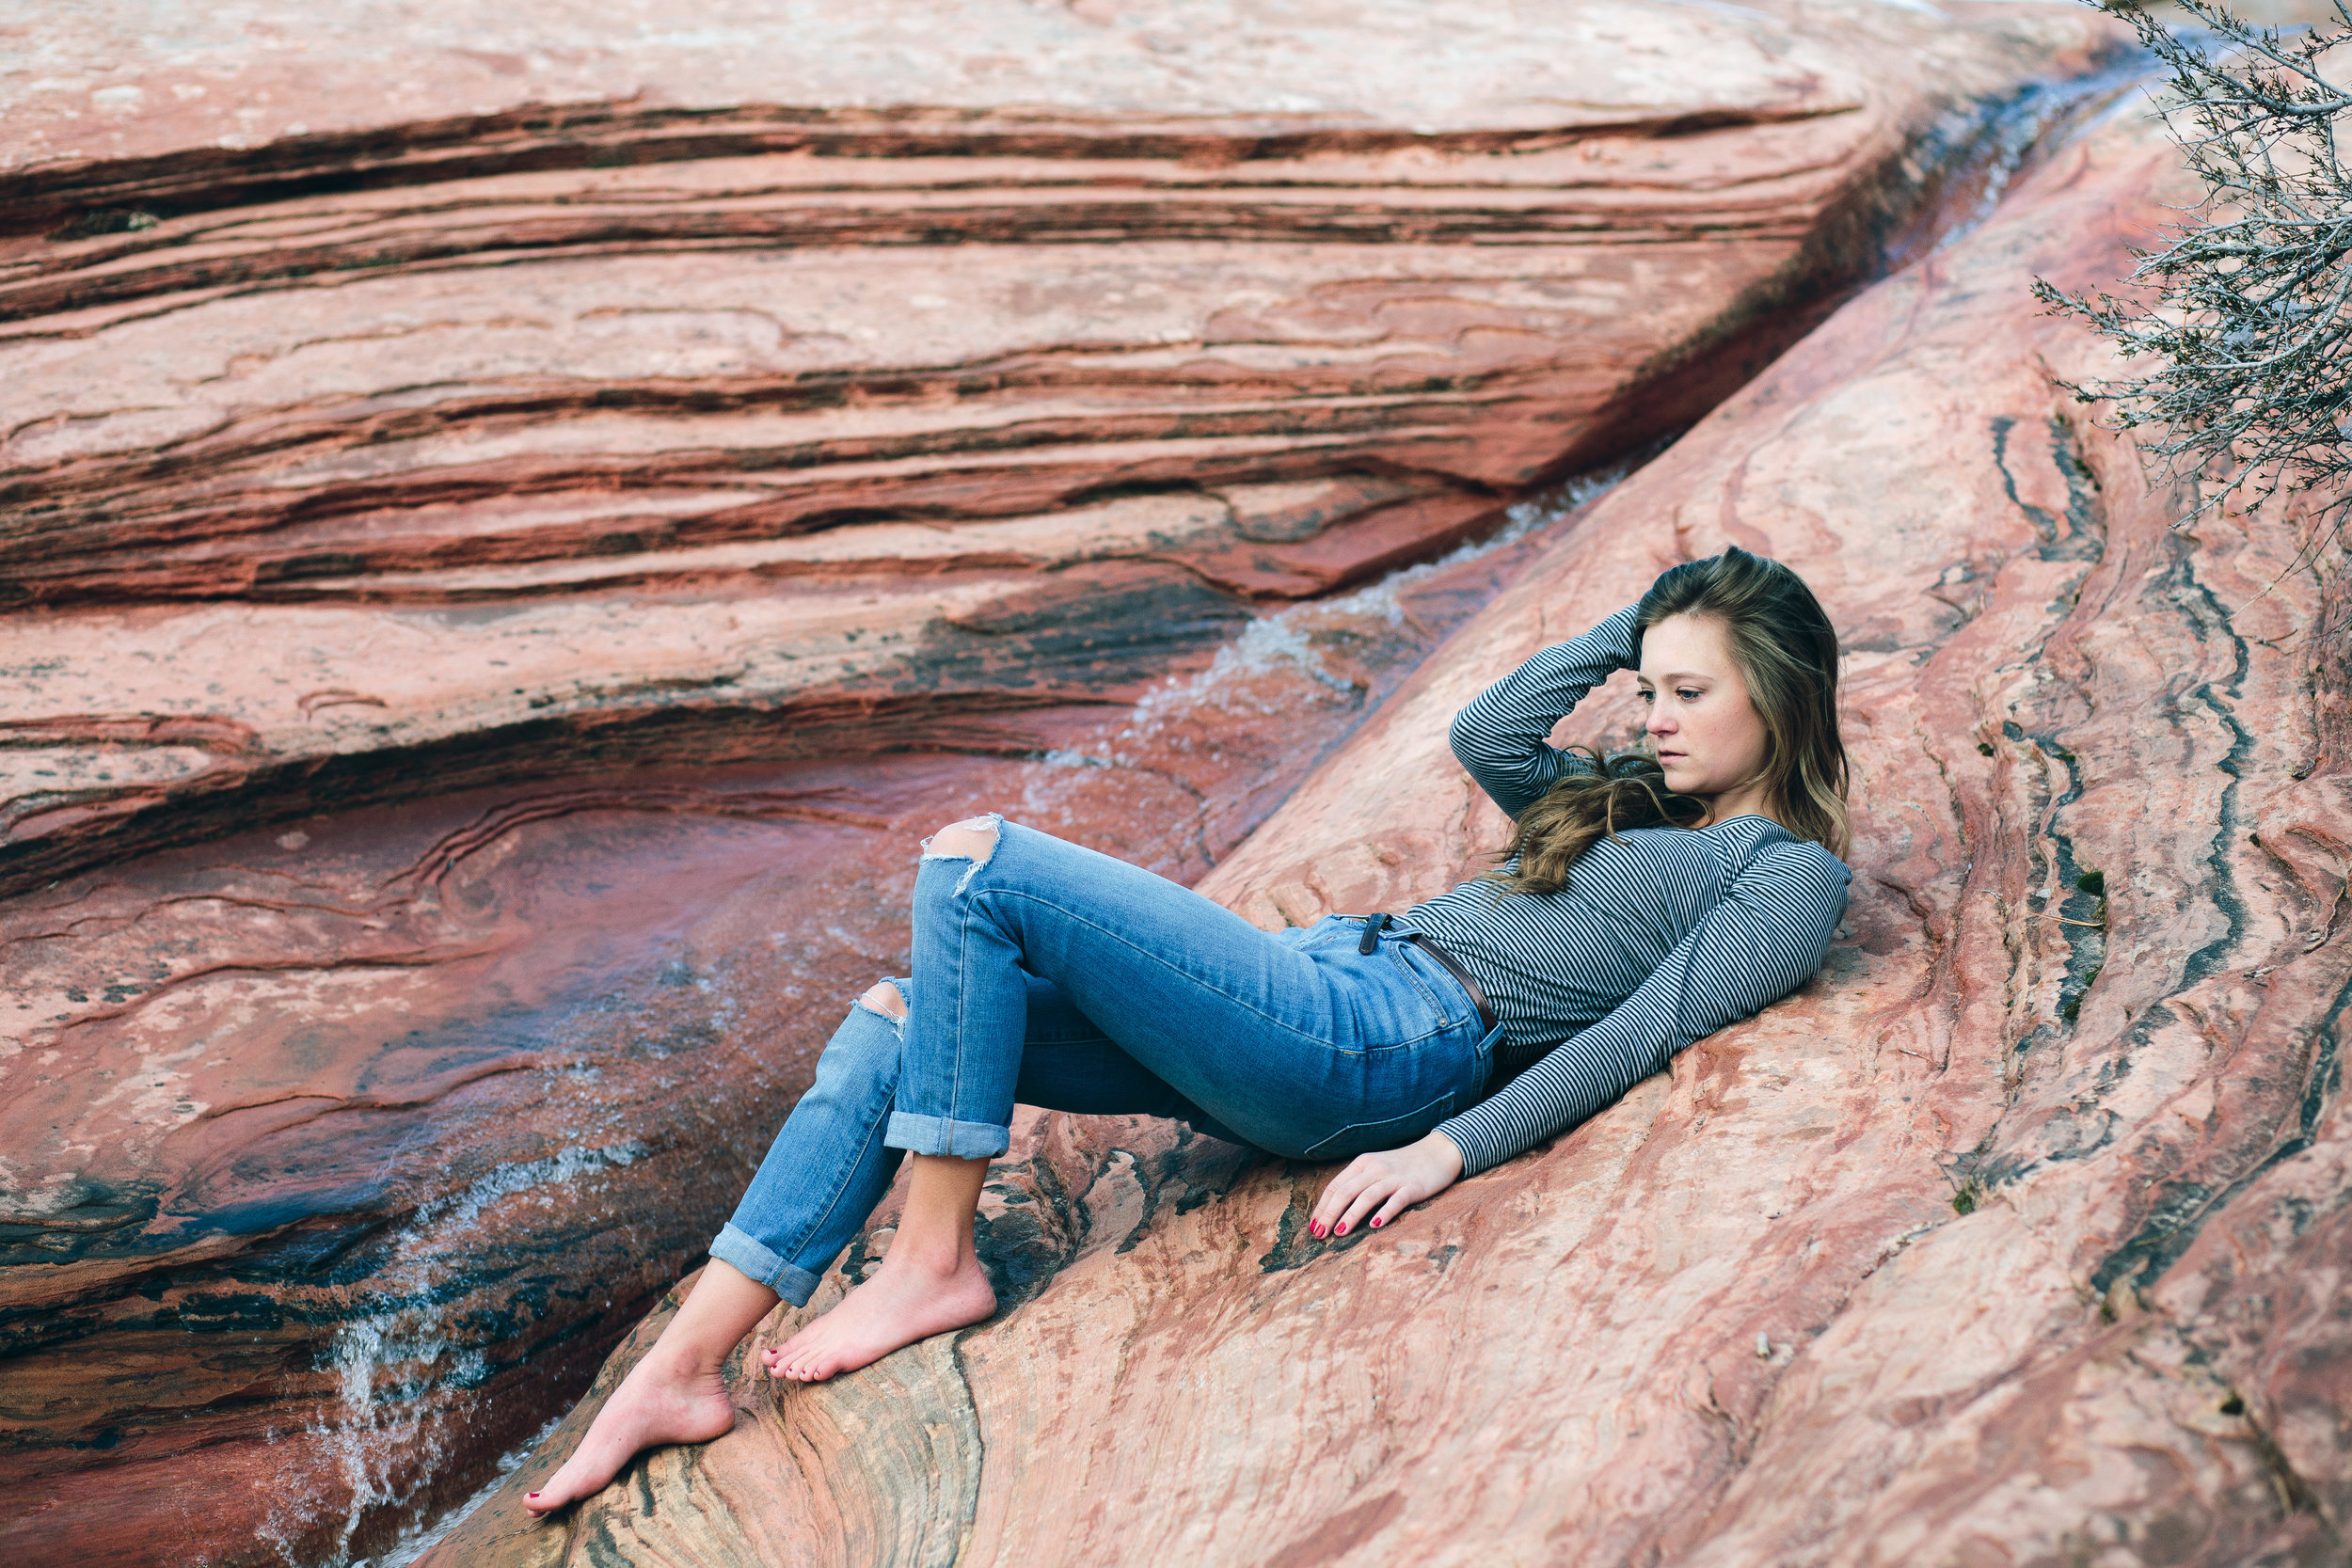 Beautiful girl modeling in Zion National Park